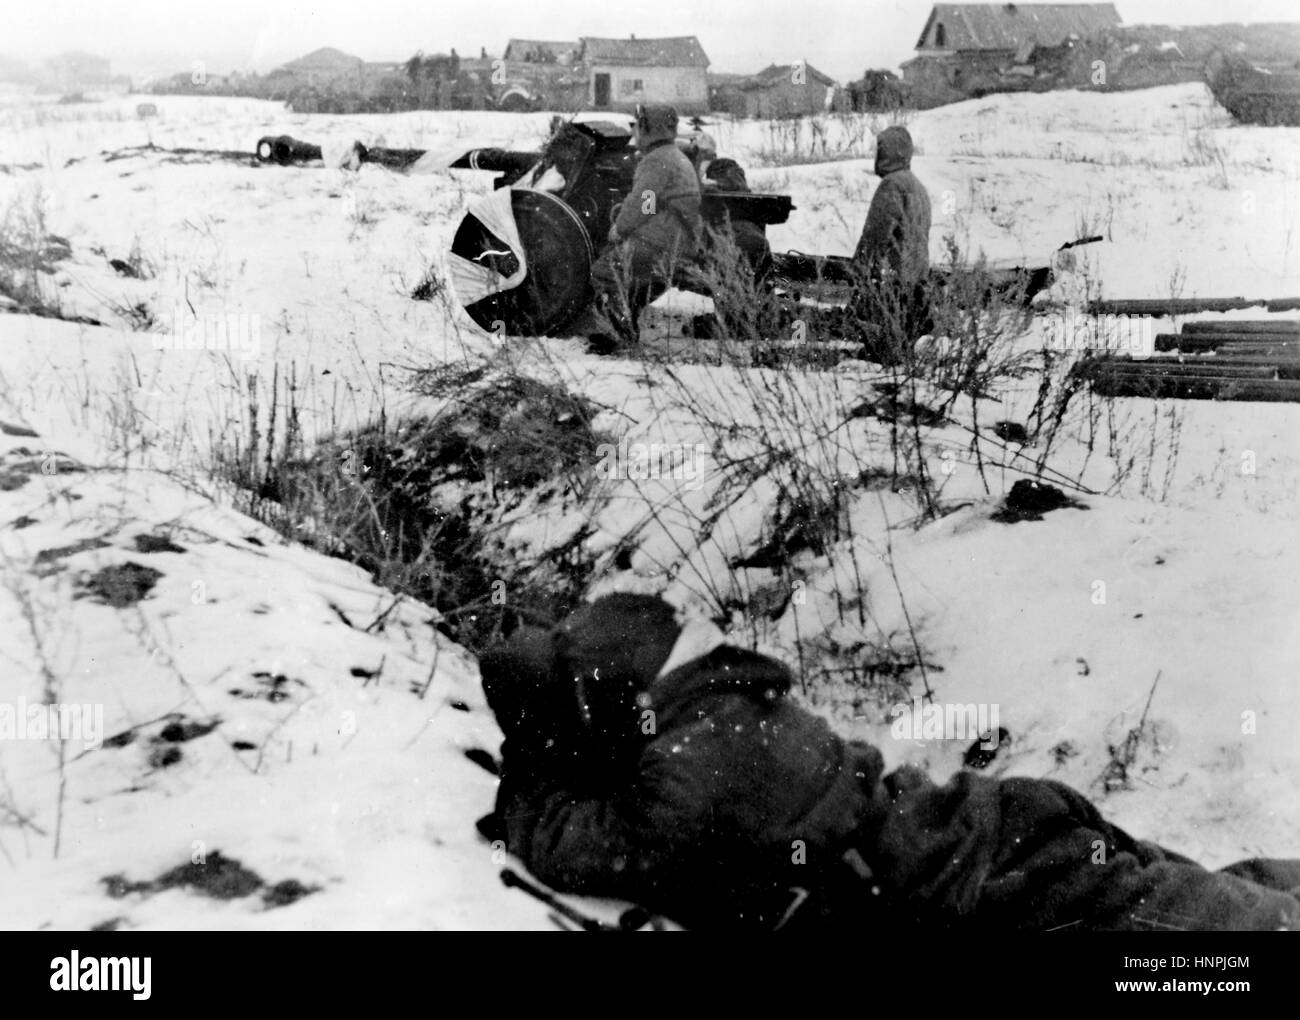 The Nazi propaganda image shows German Wehrmacht antitank guns in the battle zone of Stalingrad (today Volgograd). Taken in January 1943. A Nazi state reporter has written on the reverse of the picture on 12.01.1943, 'Antitank guns in the Stalingrad area. Our troops near Stalingrad are also engaged in bitter and successful defensive fighting against Soviet attacks. - Our picture shows antitank guns in the area south west of Stalingrad awaiting Soviet tanks.' Fotoarchiv für Zeitgeschichte - NO WIRE SERVICE - | usage worldwide Stock Photo